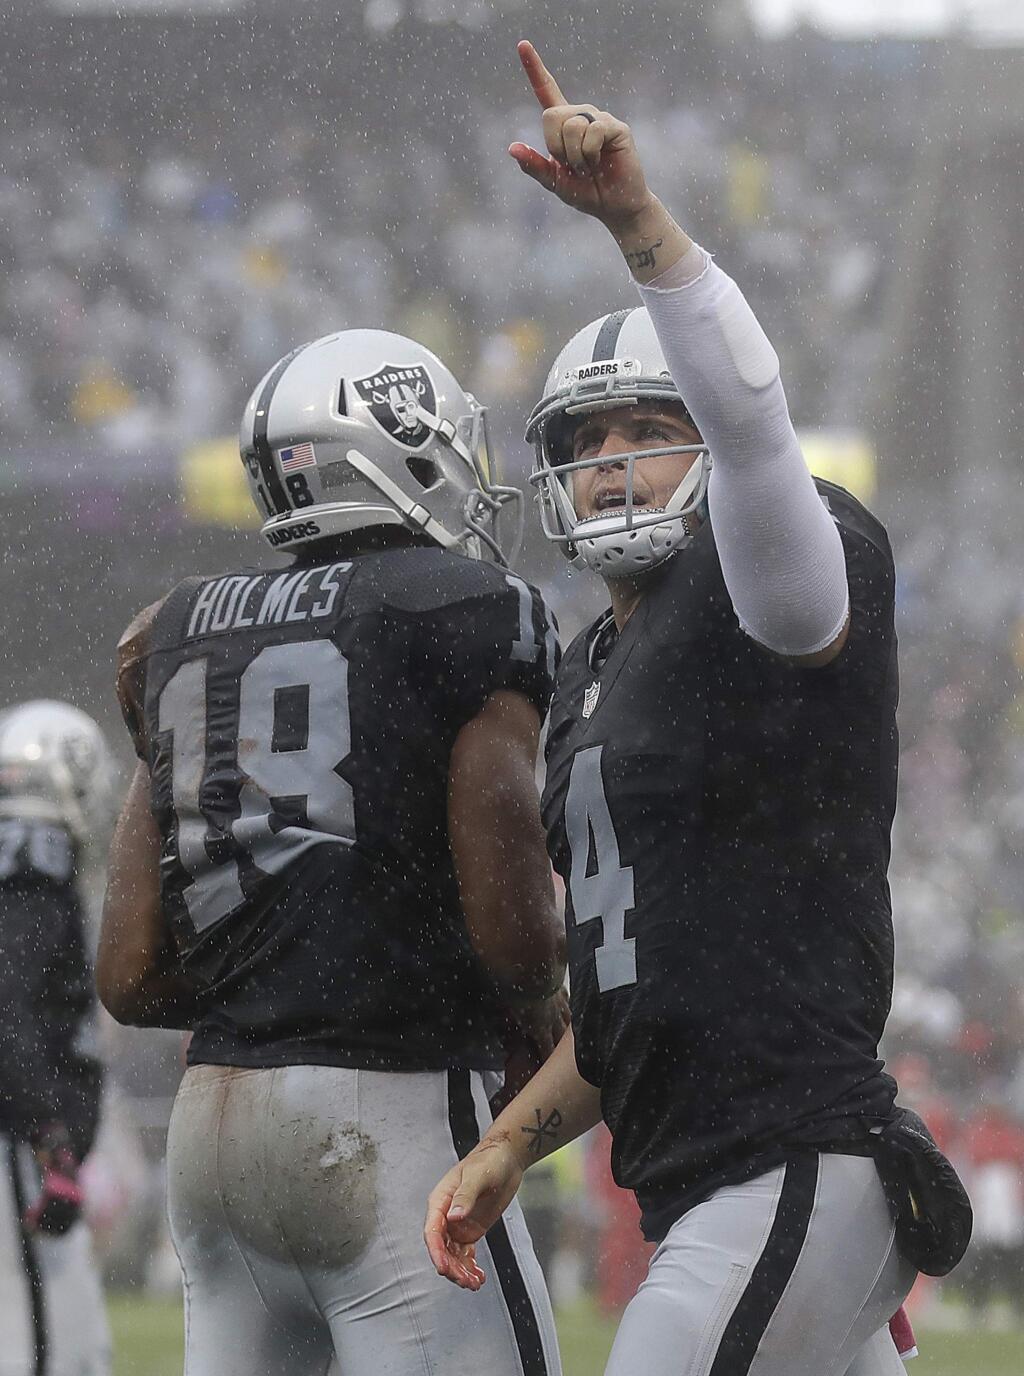 Oakland Raiders quarterback Derek Carr (4) and wide receiver Andre Holmes (18) celebrate after connecting on a touchdown pass during the first half of an NFL football game against the Kansas City Chiefs in Oakland, Calif., Sunday, Oct. 16, 2016. (AP Photo/Marcio Jose Sanchez)